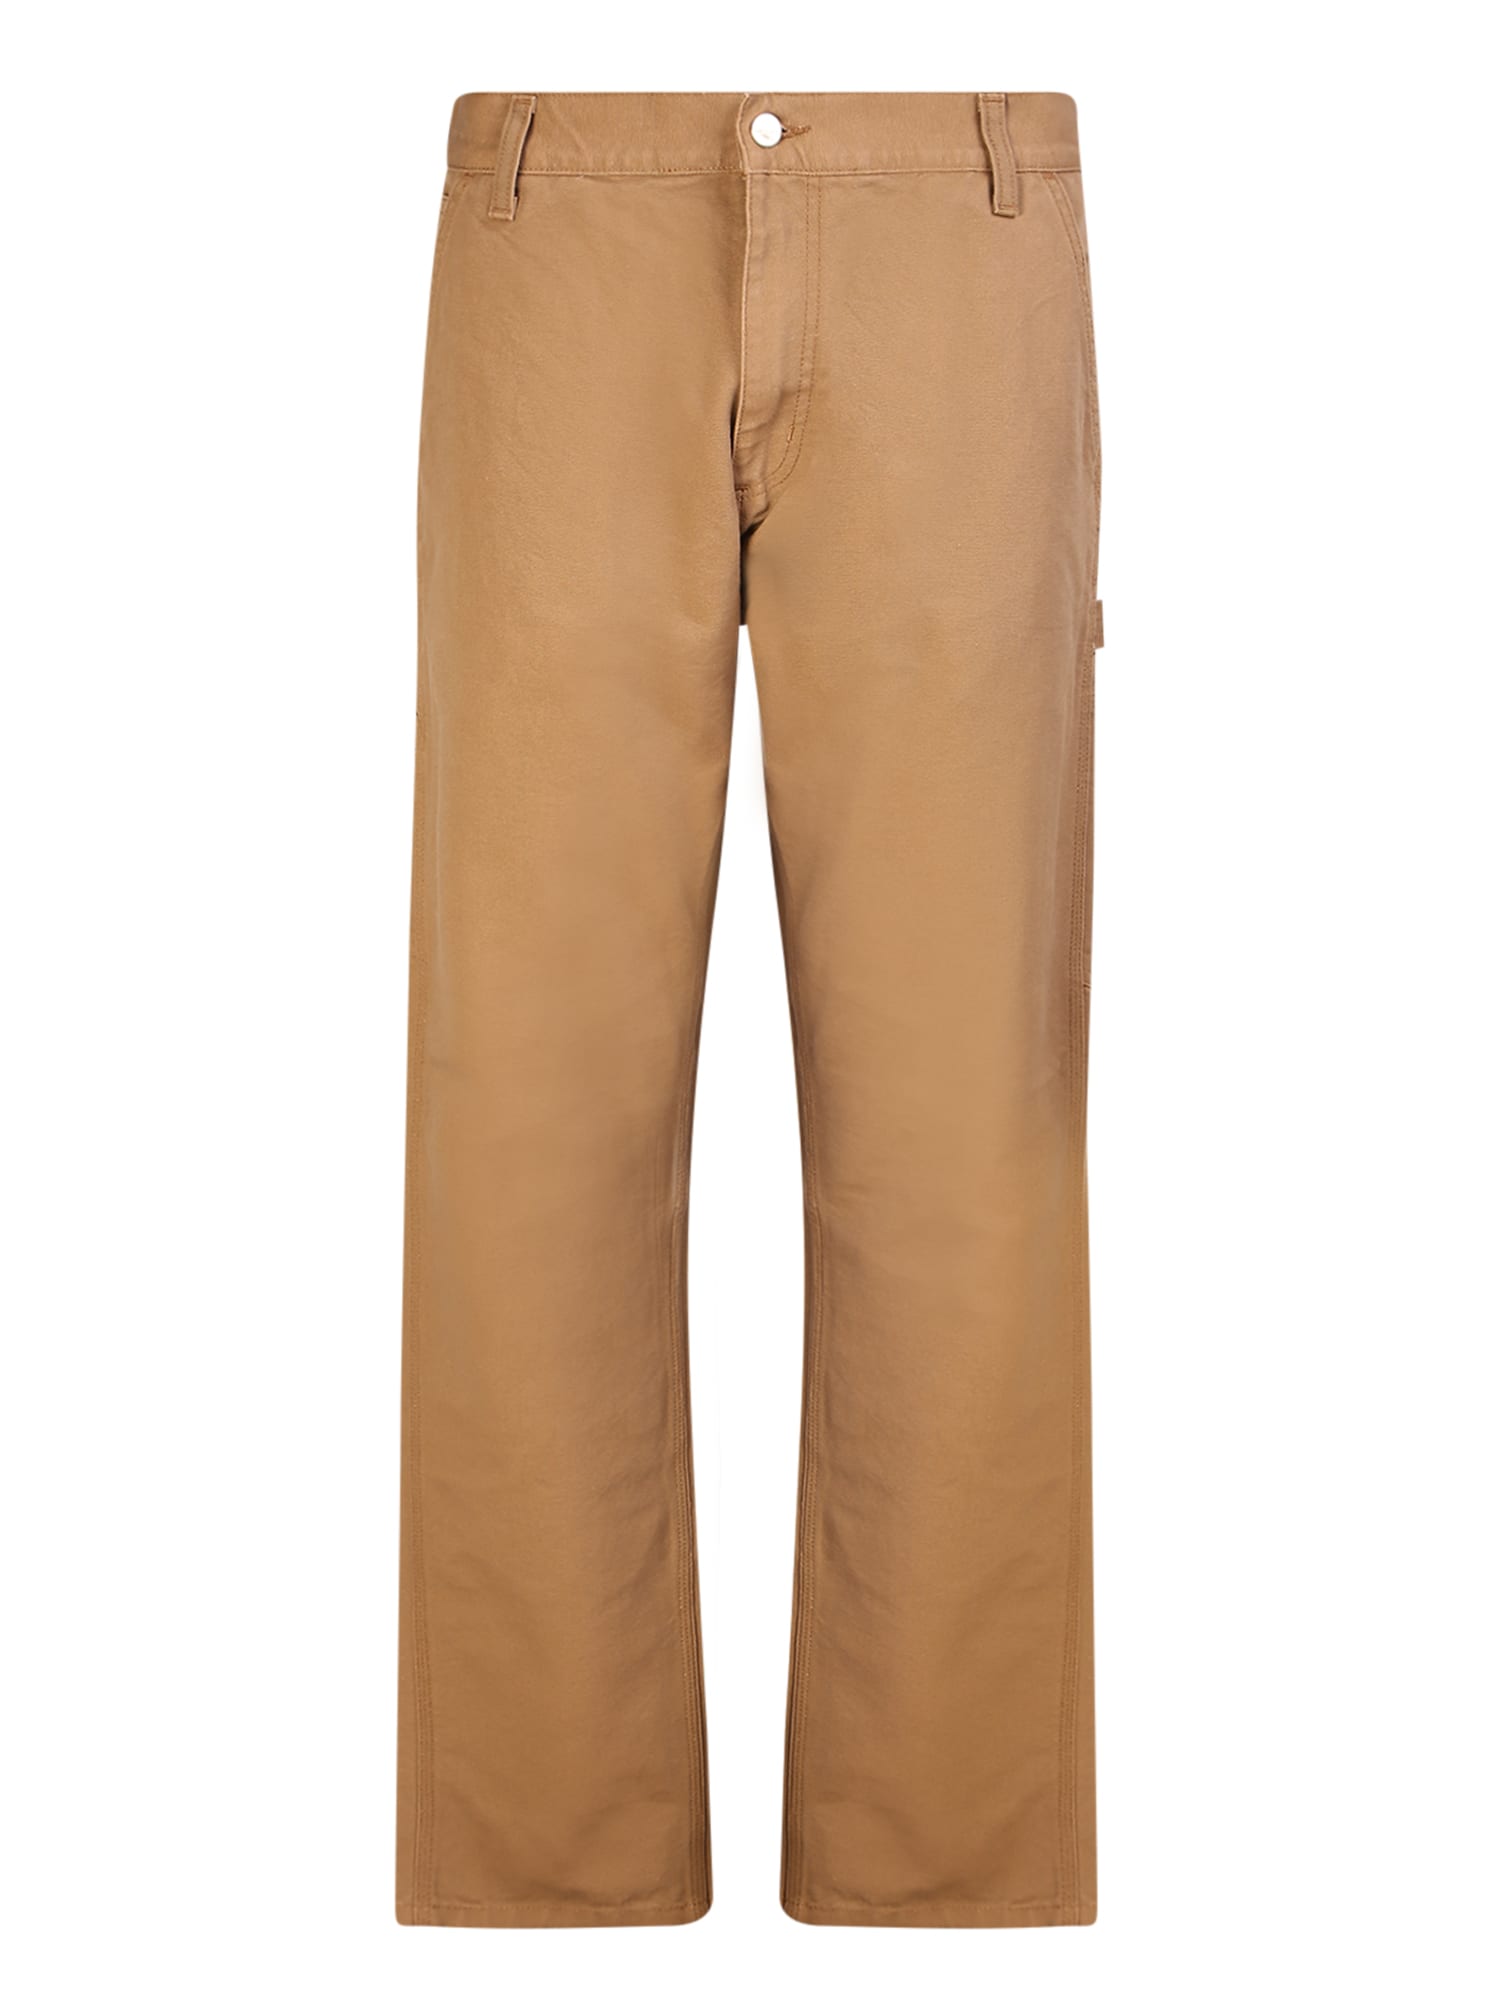 Carhartt Brown Tapered Trousers